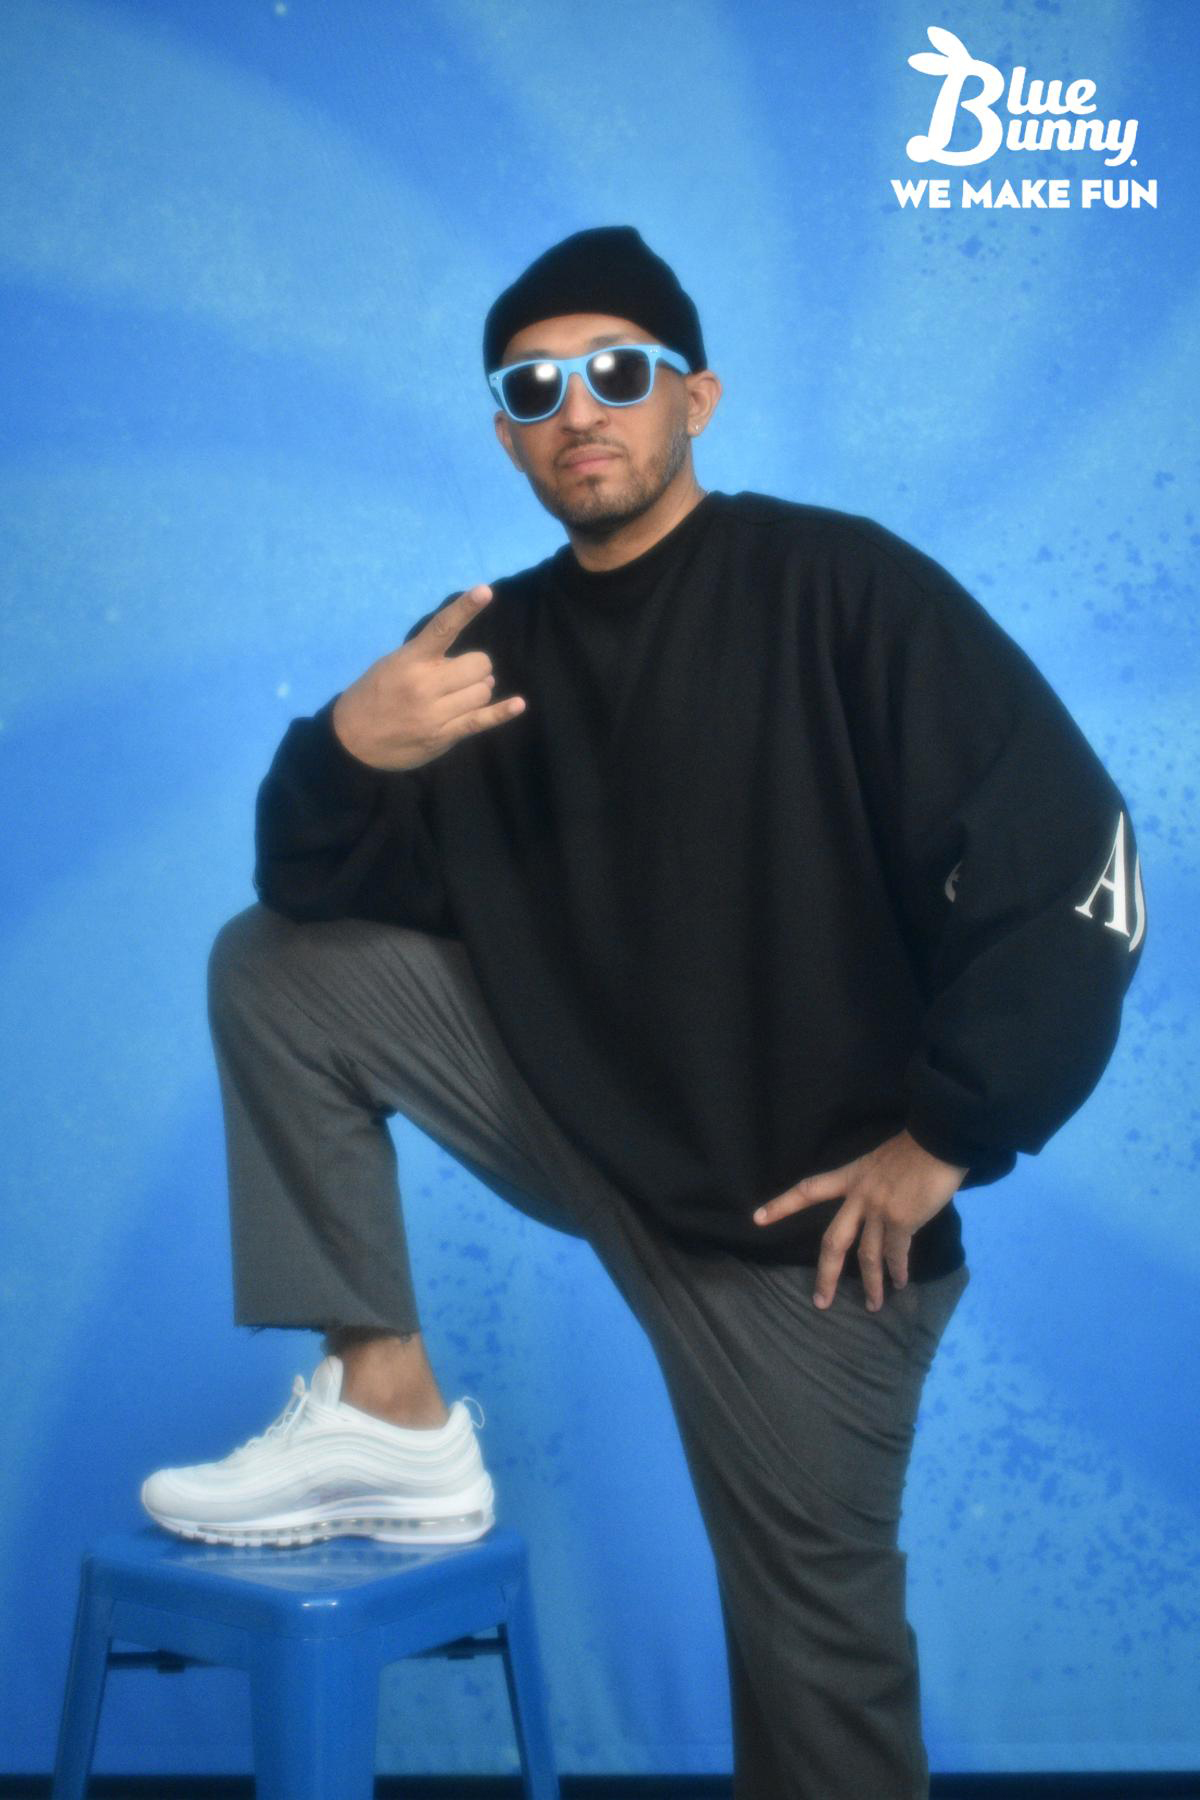 Man with his foot up on a stool wearing blue sunglasses